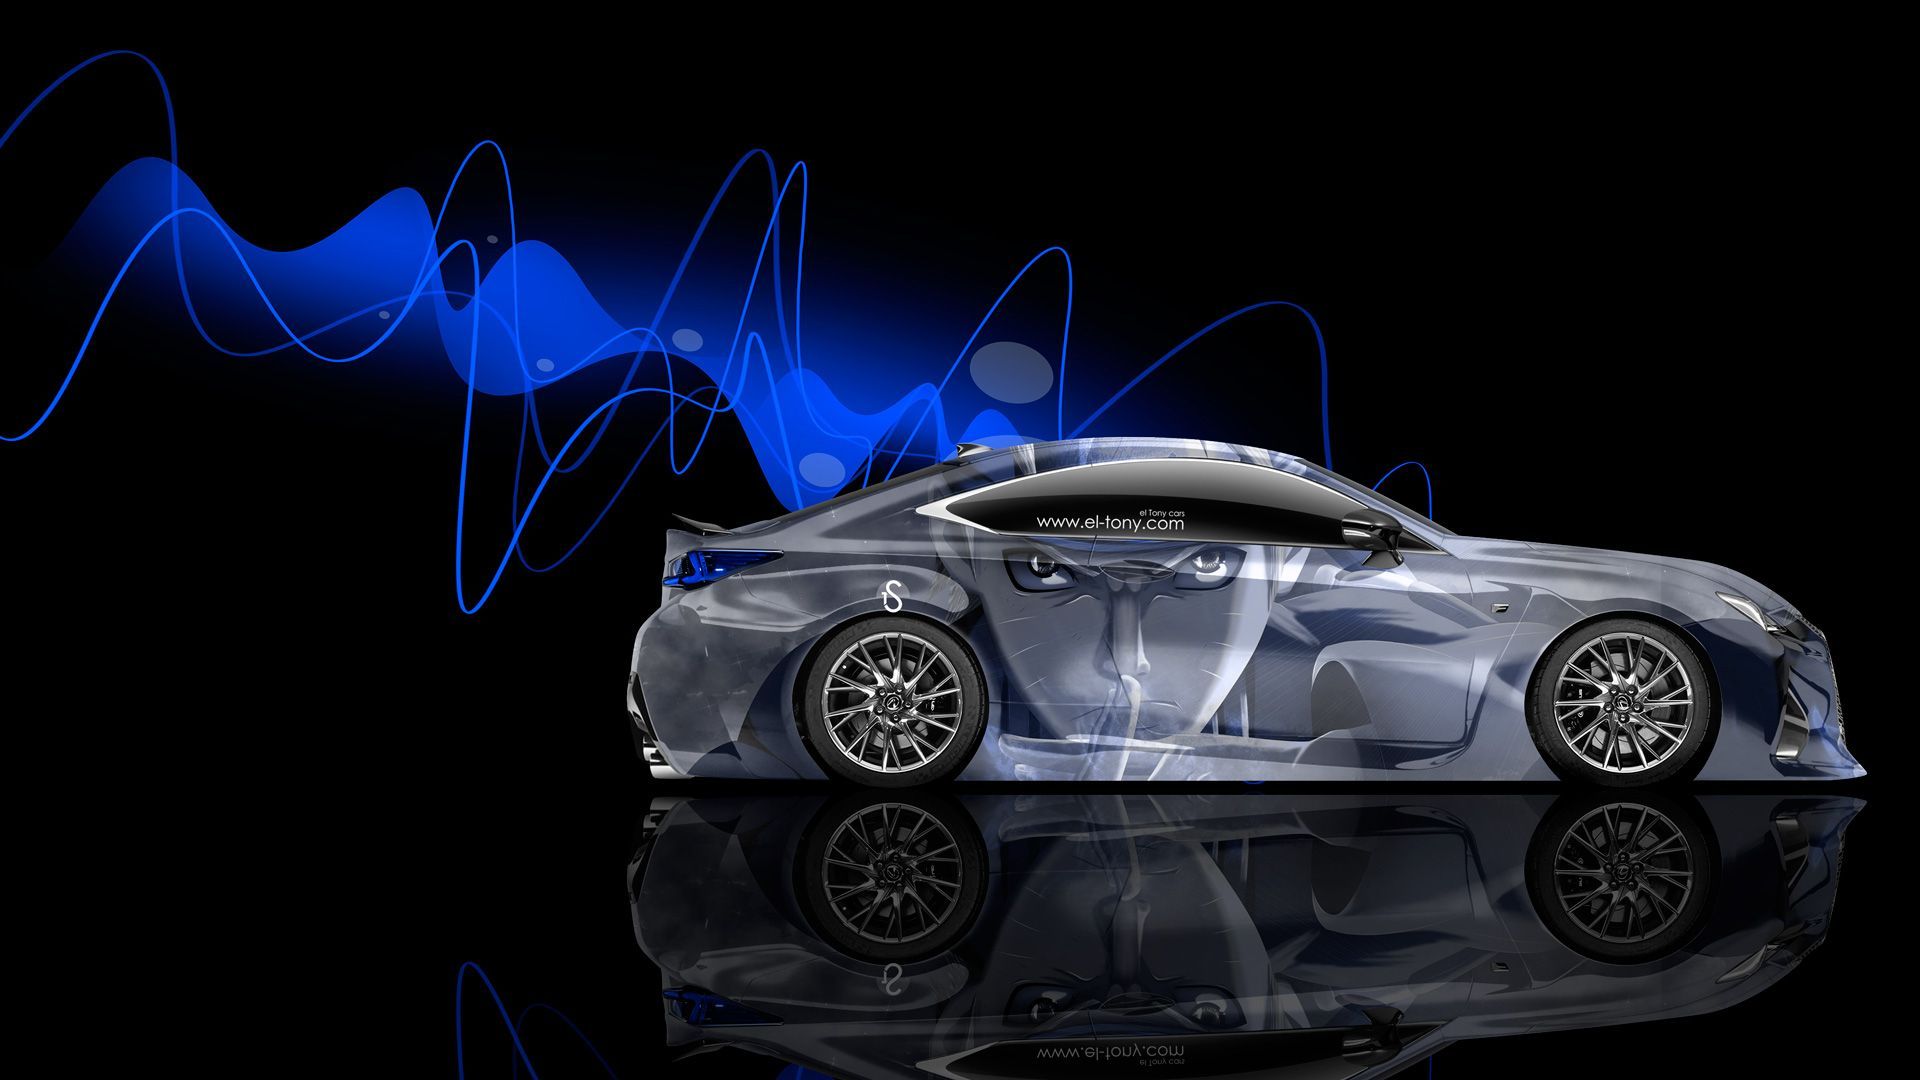 Modern Car Audio Wallpaper At Picture C1x And Car Audio Wallpaper New At Auto. Car audio, Car, Auto